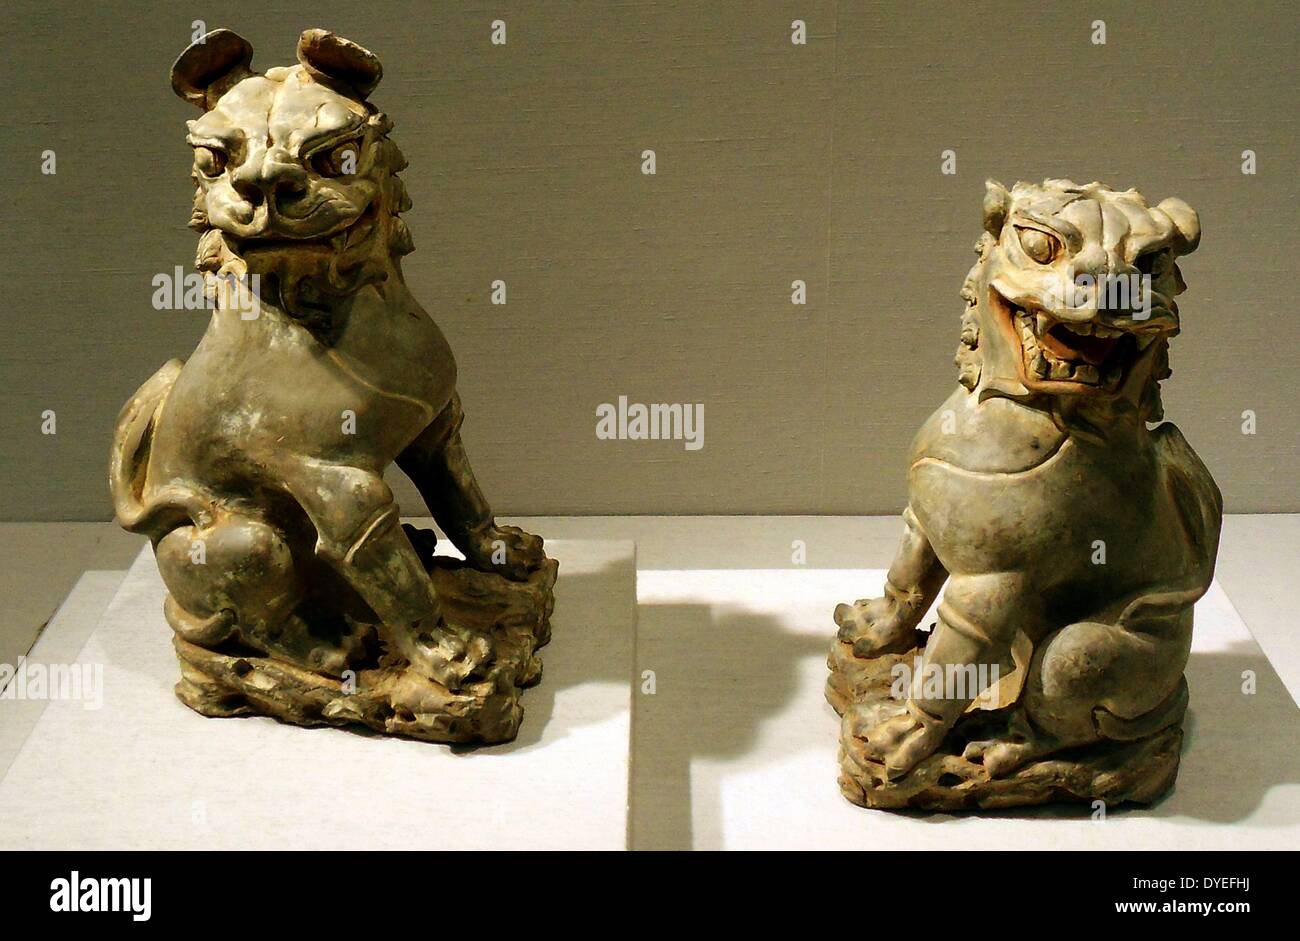 Pair of Seated Lions from the Tang Dynasty 7th Century A.D. Stock Photo